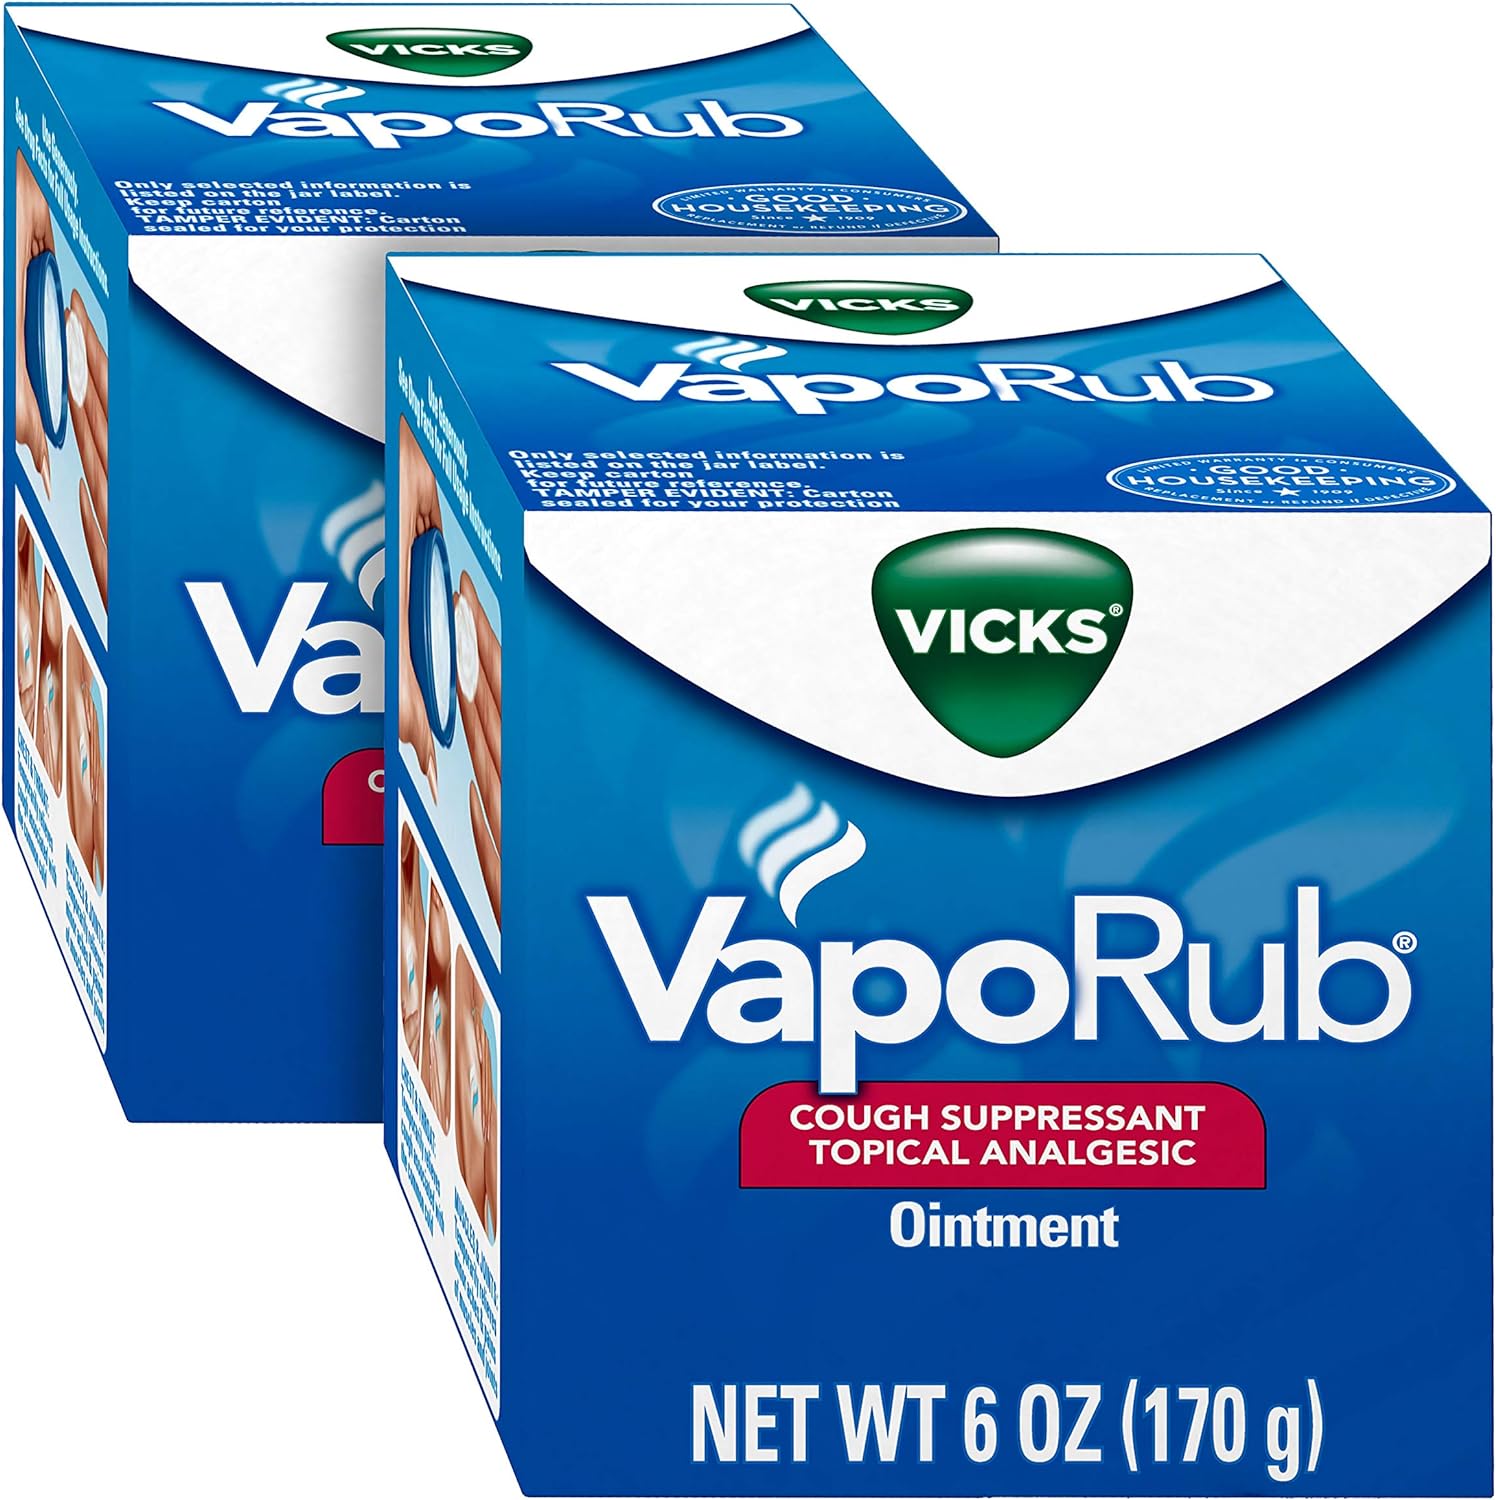 Vicks VapoRub, Original, Cough Suppressant, Topical Chest Rub & Analgesic Ointment, Medicated Vicks Vapors, Relief from Cough Due to Cold, Aches & Pains, 6 Oz (Pack of 2)